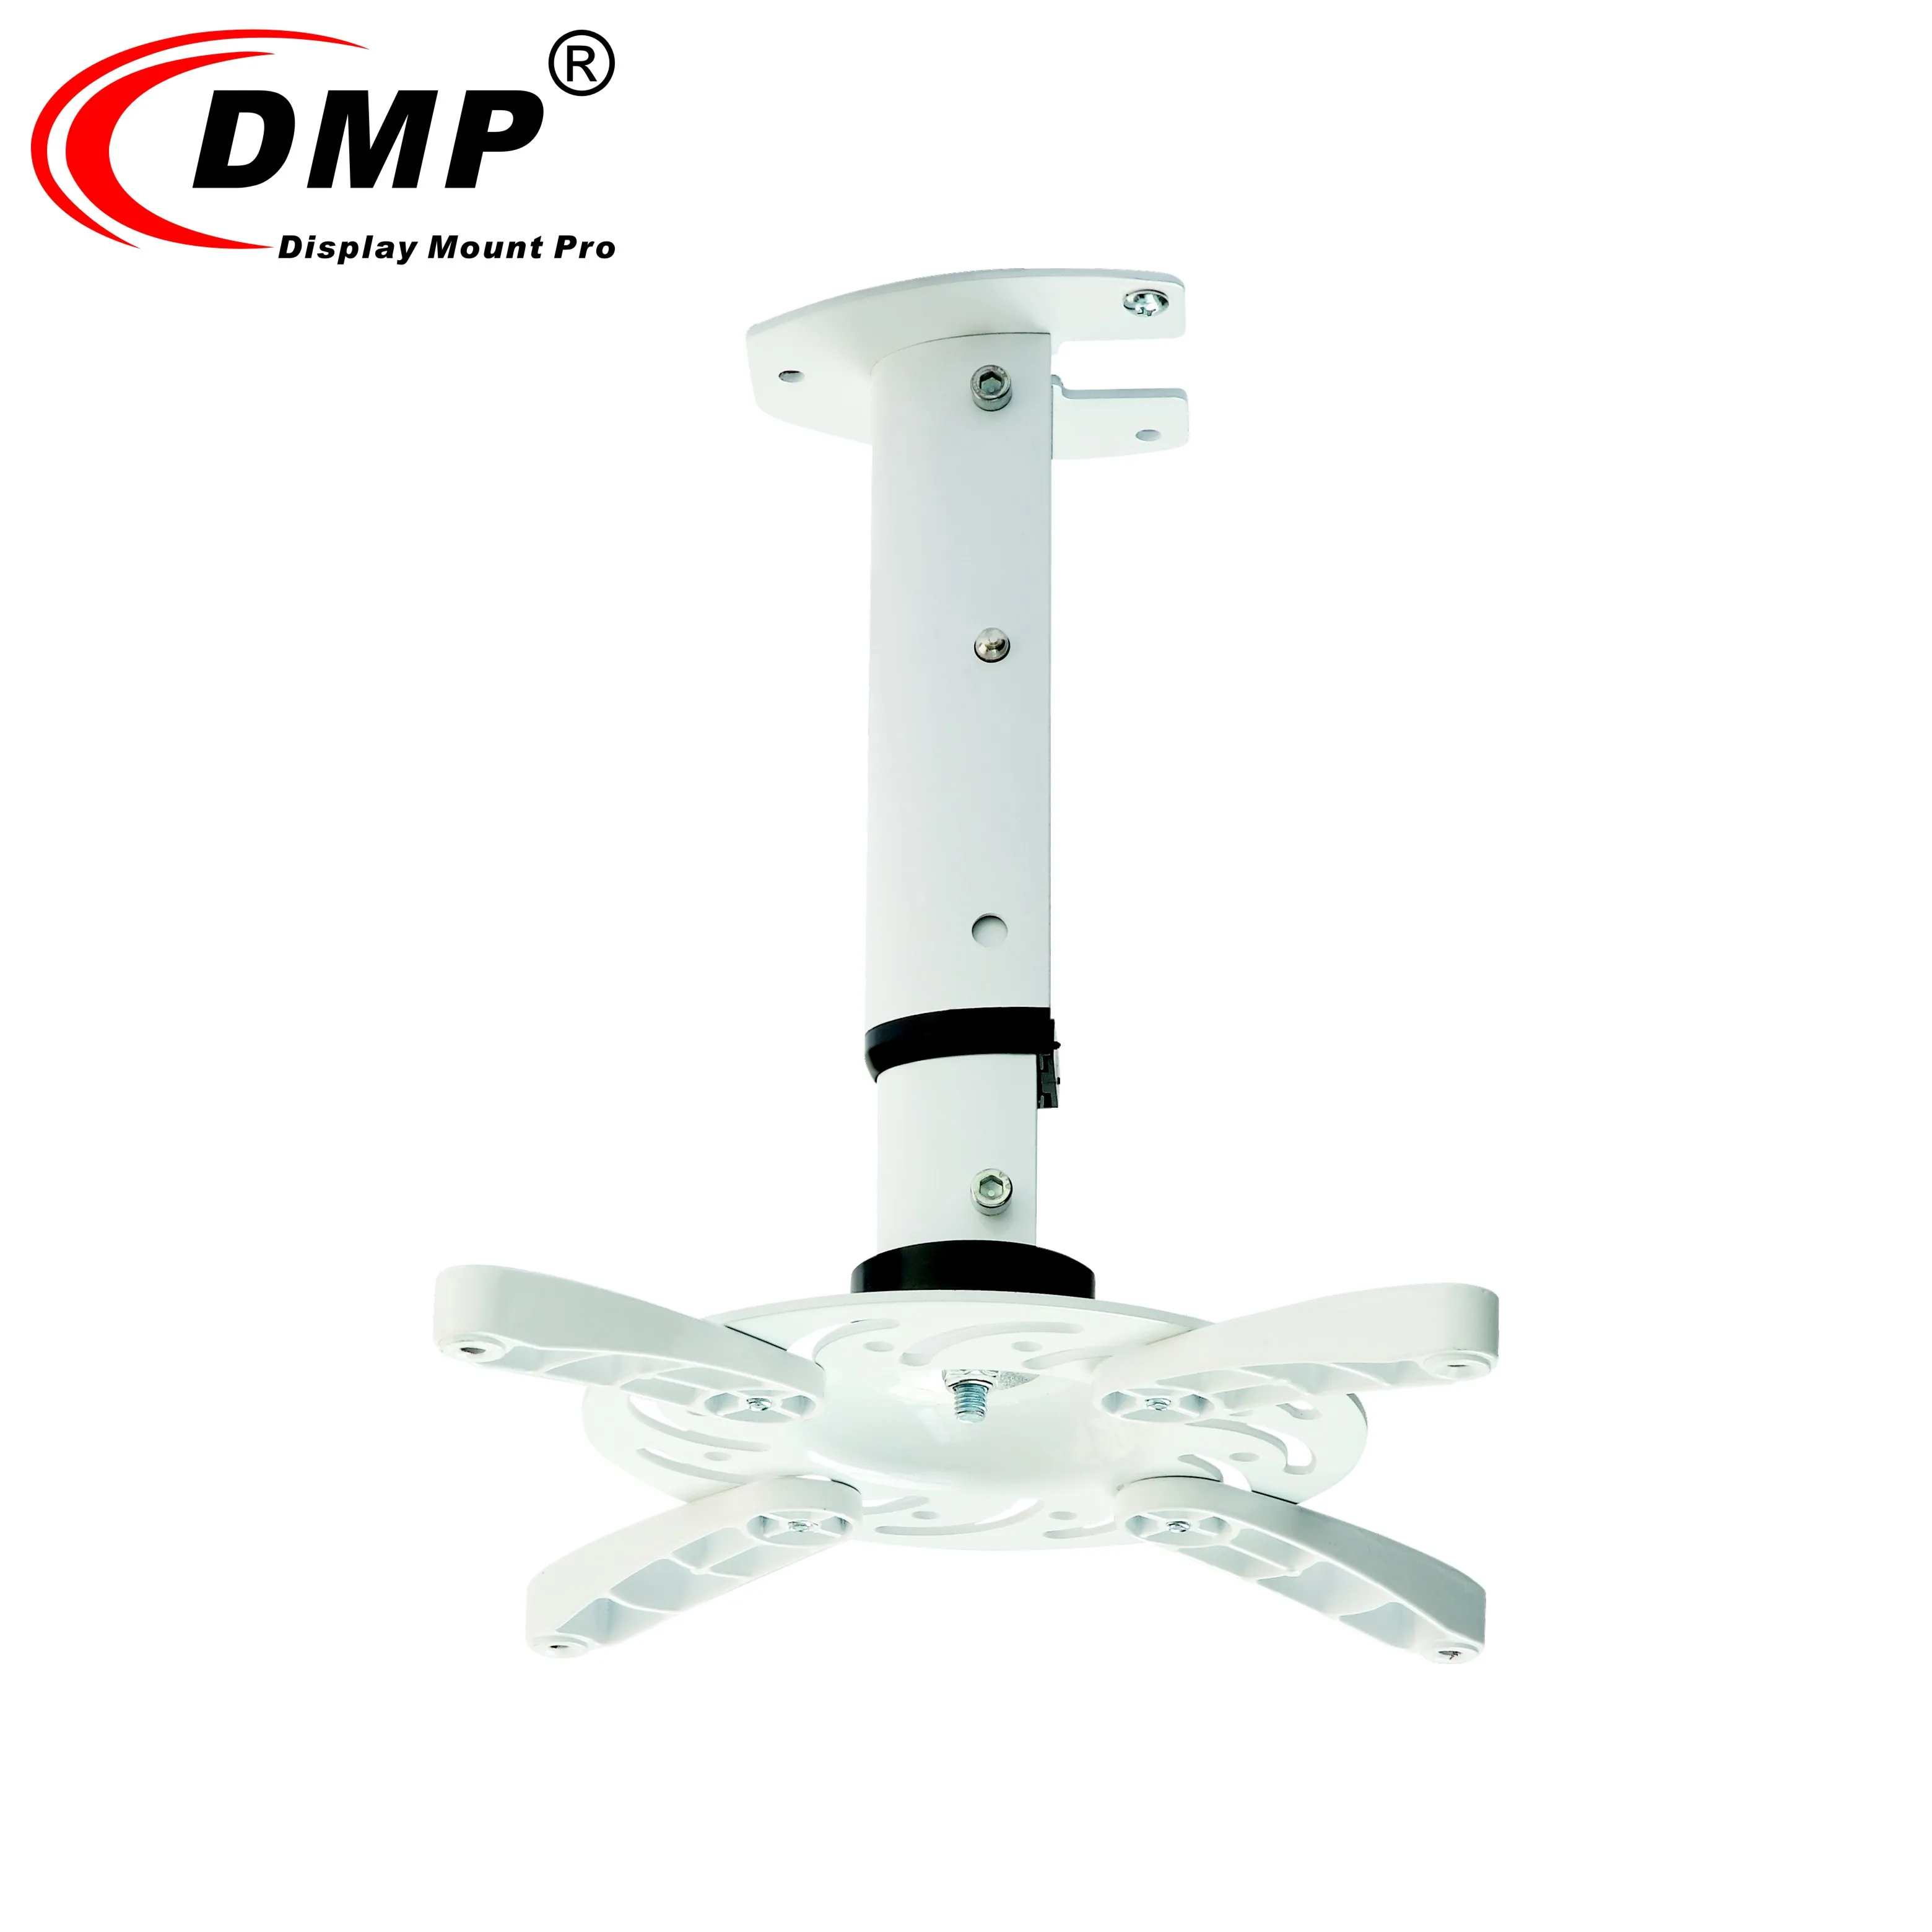 Pm102 Retractable Ceiling Video Projector Lift Projector Mount